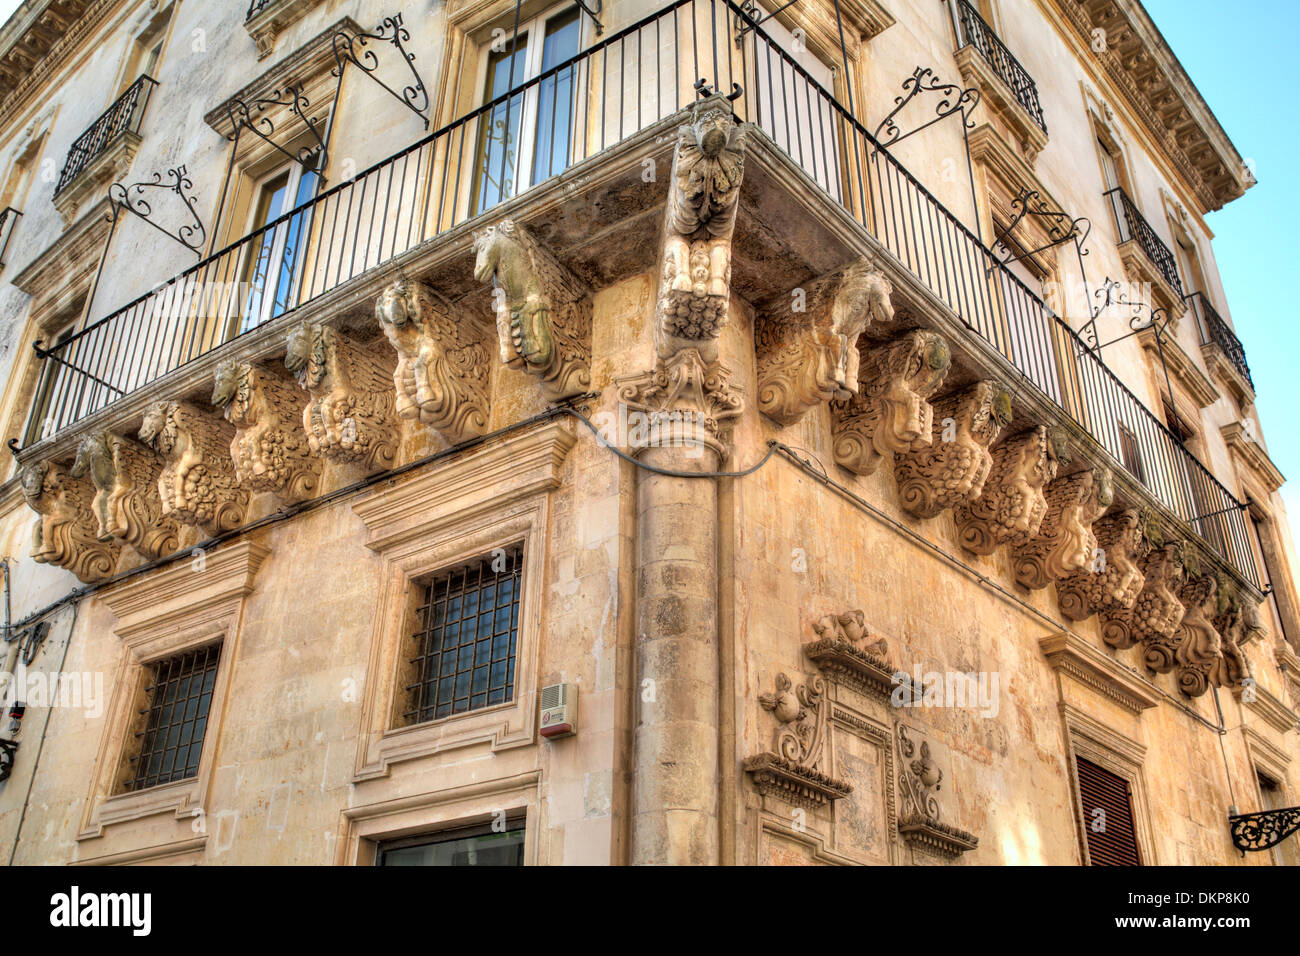 Renaissance house with sculptures under balcony, Lecce, Apulia, Italy Stock Photo